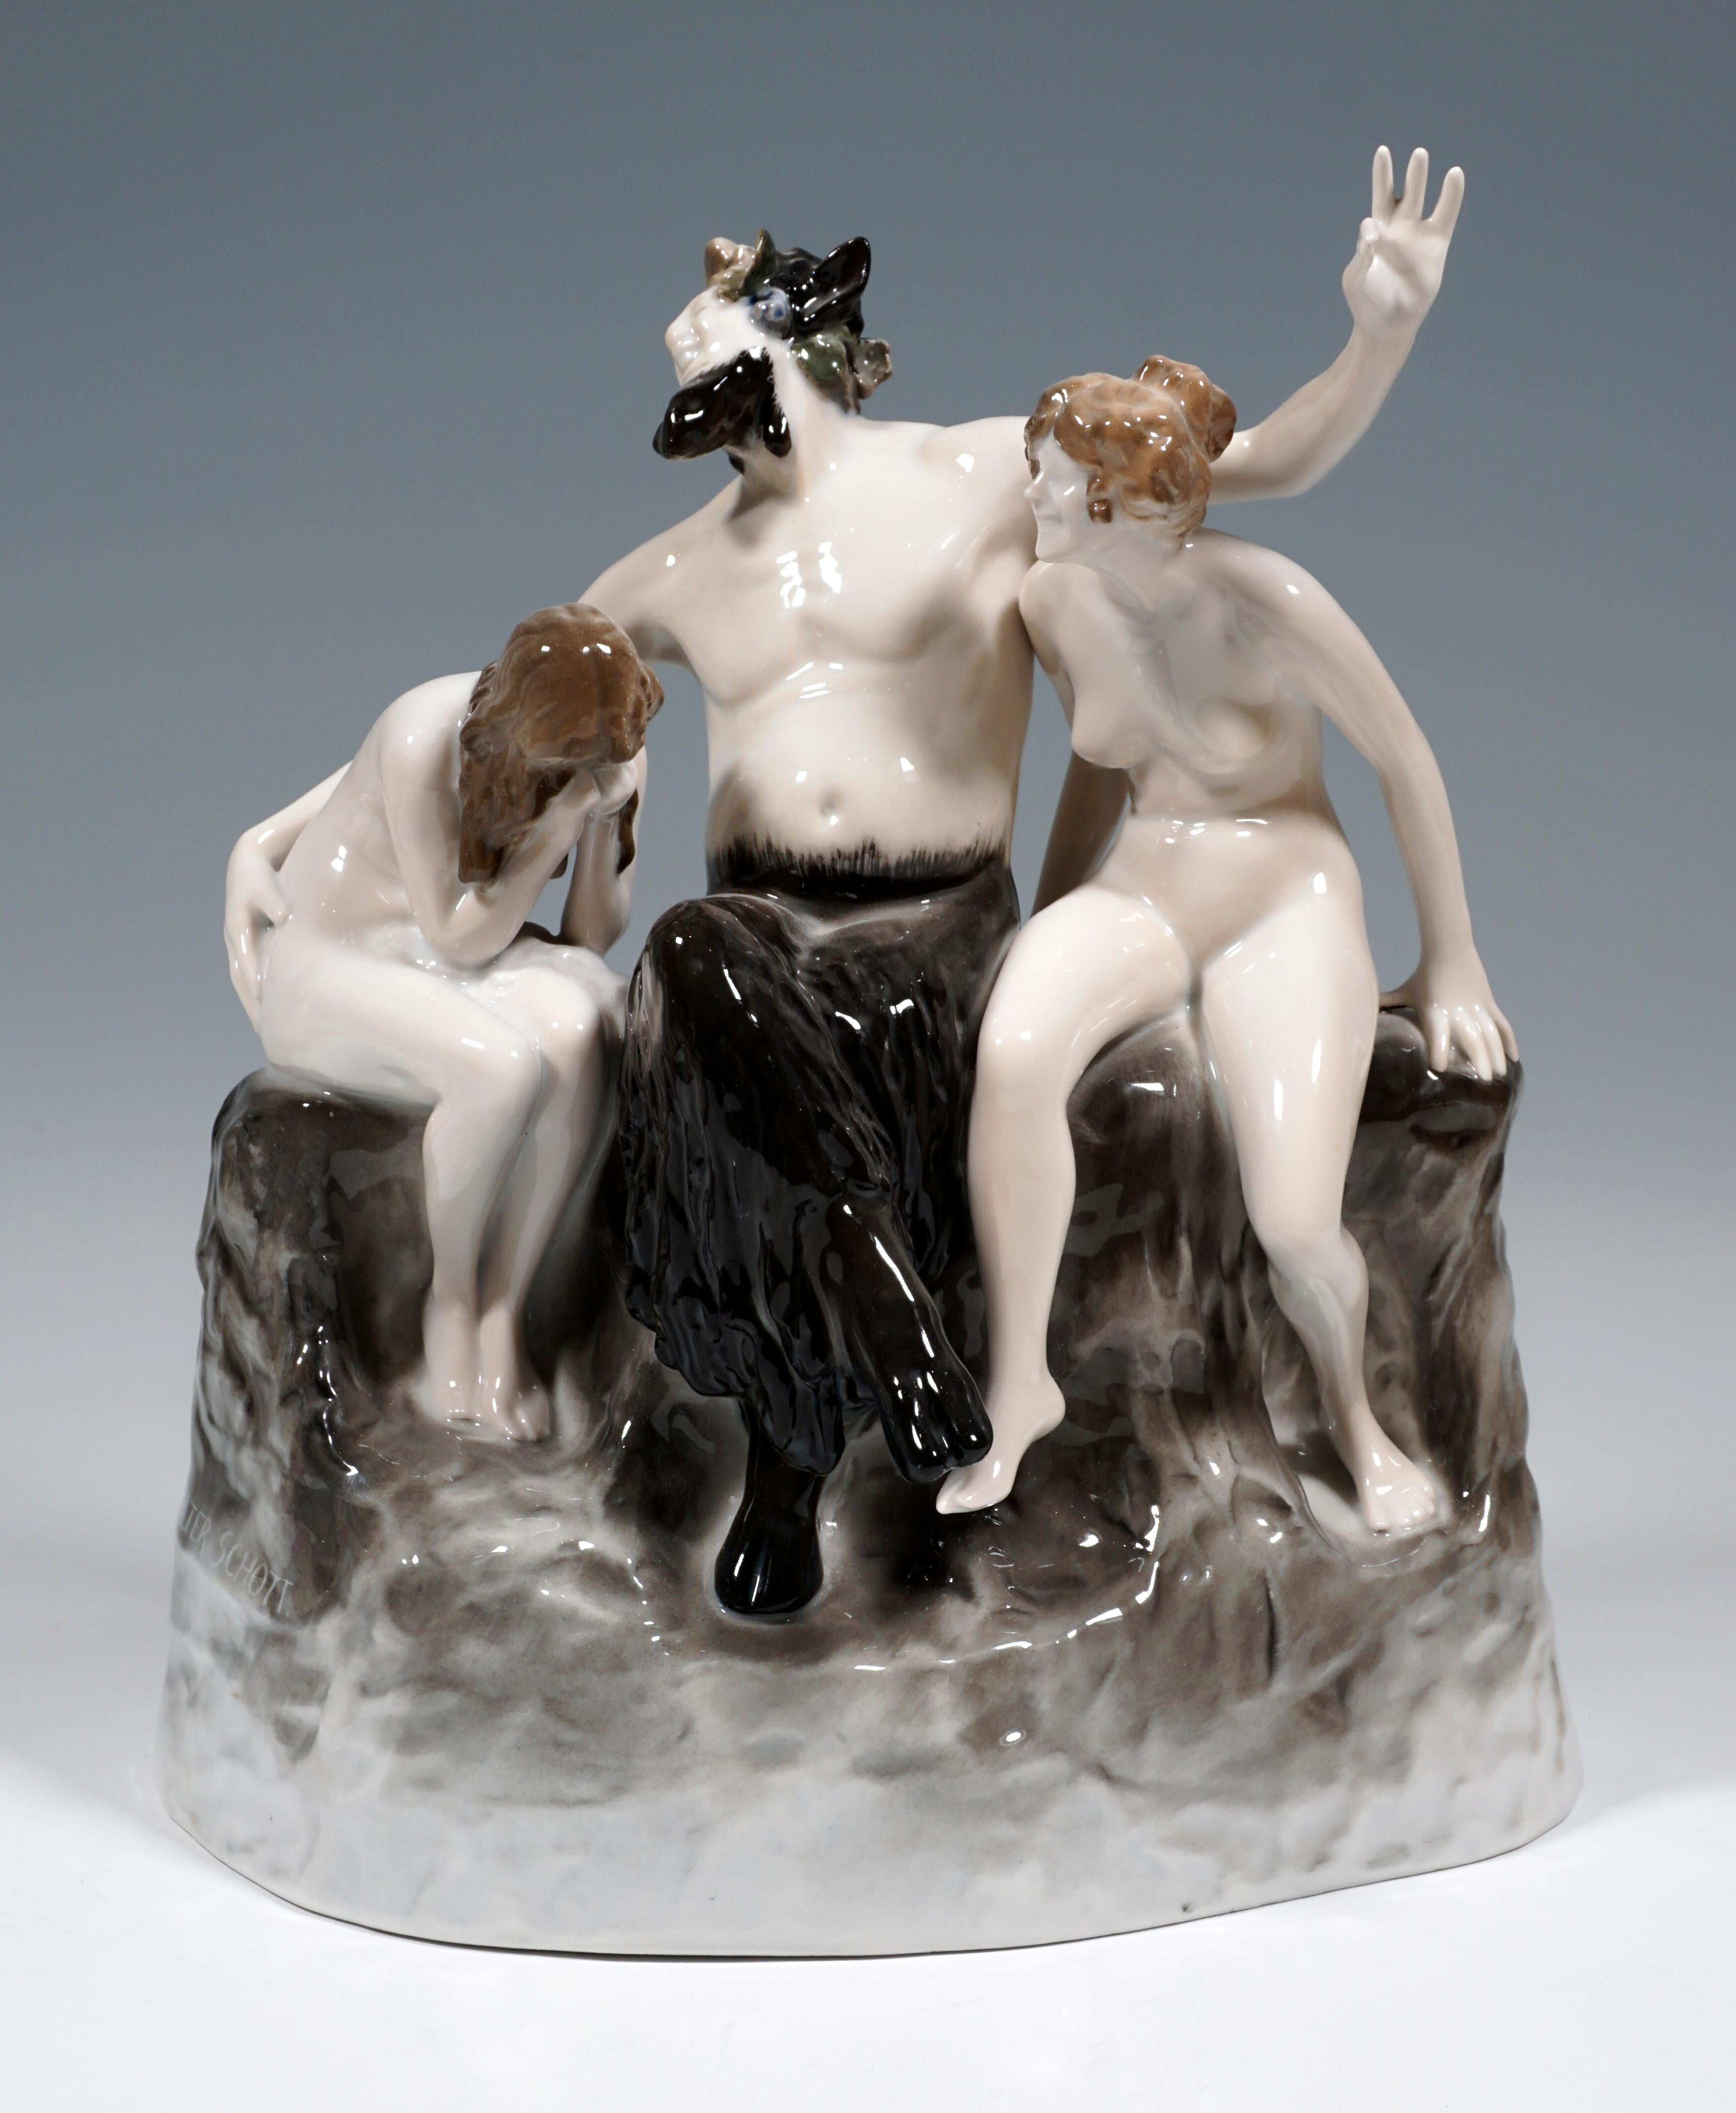 Admirable Art Nouveau Figurine by Rosenthal.
Laughing faun with crossed goat legs flanked by two nymphs sitting on a rock plinth. While the female figure on the left buries her face shamefully in her hands, the second looks over at her, laughing.